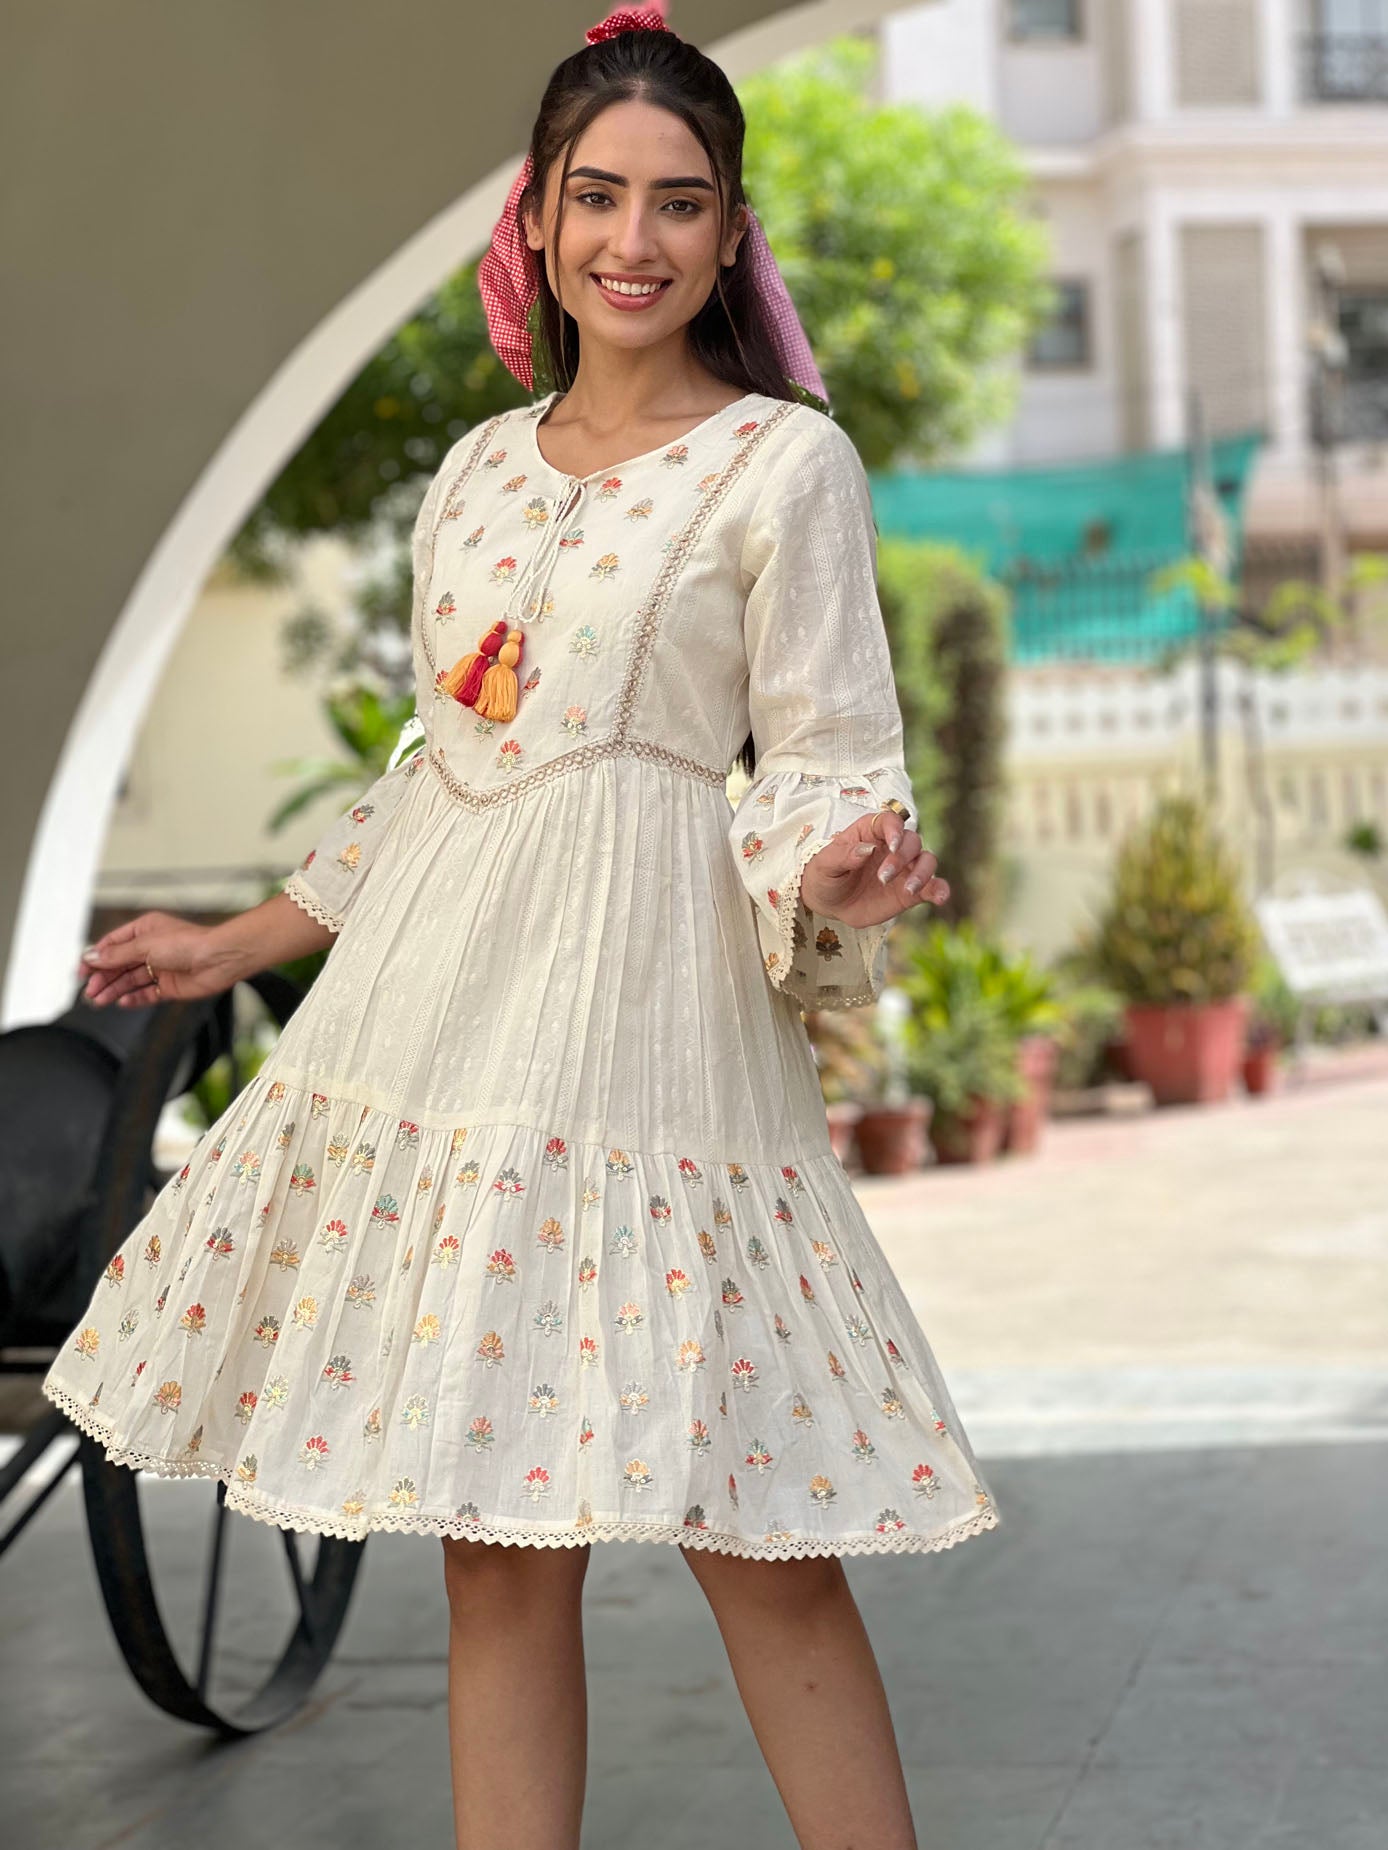 The Embroidered A-Line Dress